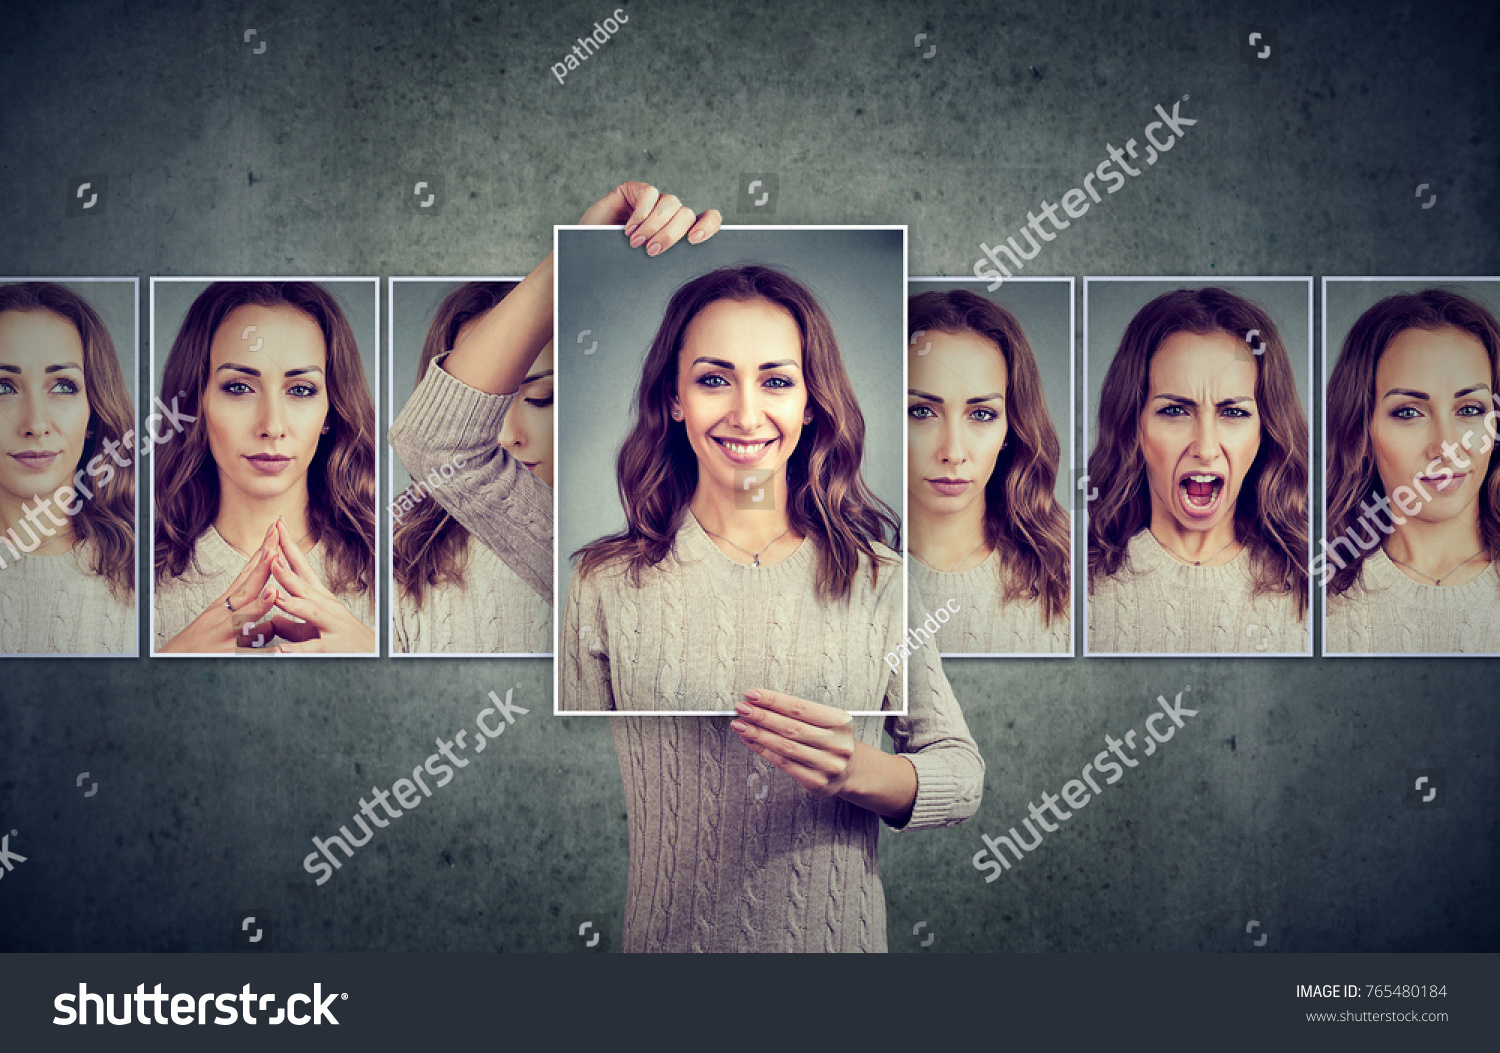 Masked woman expressing different emotions #765480184